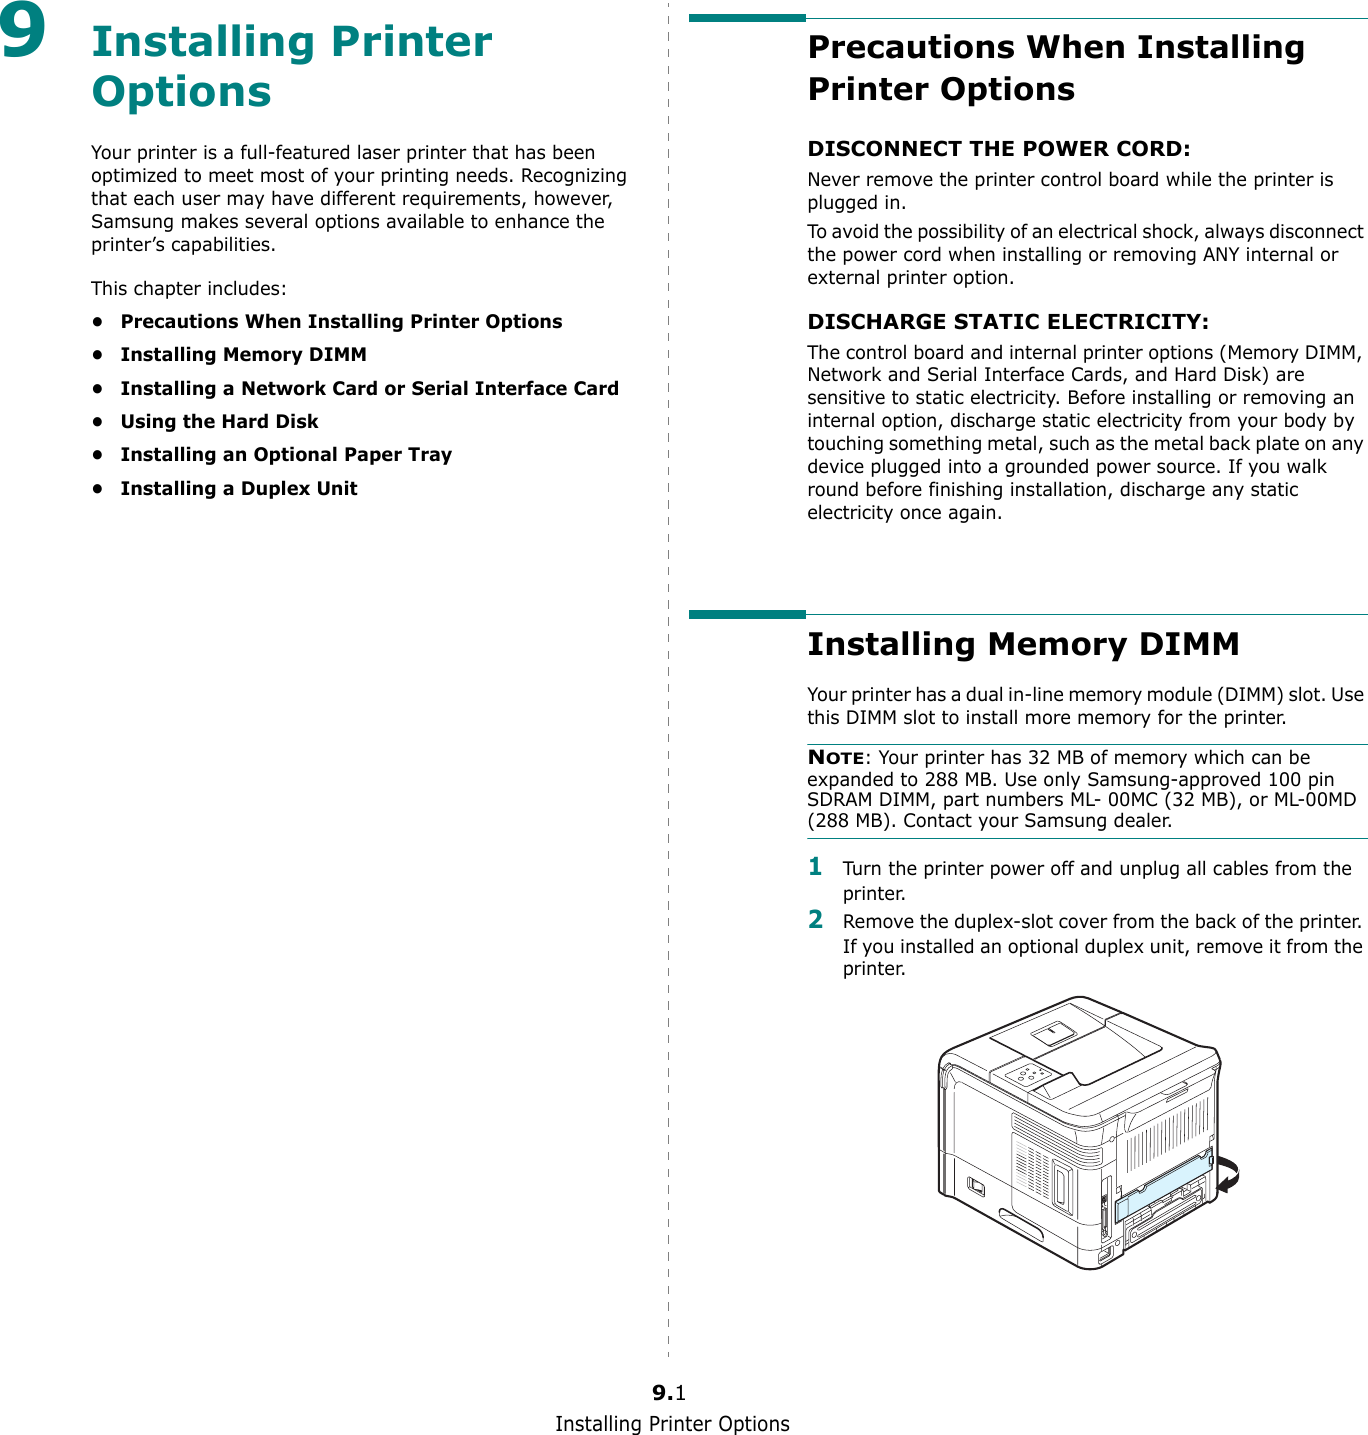 Installing Printer Options9.19Installing Printer OptionsYour printer is a full-featured laser printer that has been optimized to meet most of your printing needs. Recognizing that each user may have different requirements, however, Samsung makes several options available to enhance the printer’s capabilities.This chapter includes:• Precautions When Installing Printer Options• Installing Memory DIMM• Installing a Network Card or Serial Interface Card• Using the Hard Disk• Installing an Optional Paper Tray• Installing a Duplex UnitPrecautions When Installing Printer OptionsDISCONNECT THE POWER CORD: Never remove the printer control board while the printer is plugged in.To avoid the possibility of an electrical shock, always disconnect the power cord when installing or removing ANY internal or external printer option.DISCHARGE STATIC ELECTRICITY: The control board and internal printer options (Memory DIMM, Network and Serial Interface Cards, and Hard Disk) are sensitive to static electricity. Before installing or removing an internal option, discharge static electricity from your body by touching something metal, such as the metal back plate on any device plugged into a grounded power source. If you walk round before finishing installation, discharge any static electricity once again.Installing Memory DIMMYour printer has a dual in-line memory module (DIMM) slot. Use this DIMM slot to install more memory for the printer.NOTE: Your printer has 32 MB of memory which can be expanded to 288 MB. Use only Samsung-approved 100 pin SDRAM DIMM, part numbers ML- 00MC (32 MB), or ML-00MD (288 MB). Contact your Samsung dealer.1Turn the printer power off and unplug all cables from the printer.2Remove the duplex-slot cover from the back of the printer. If you installed an optional duplex unit, remove it from the printer.